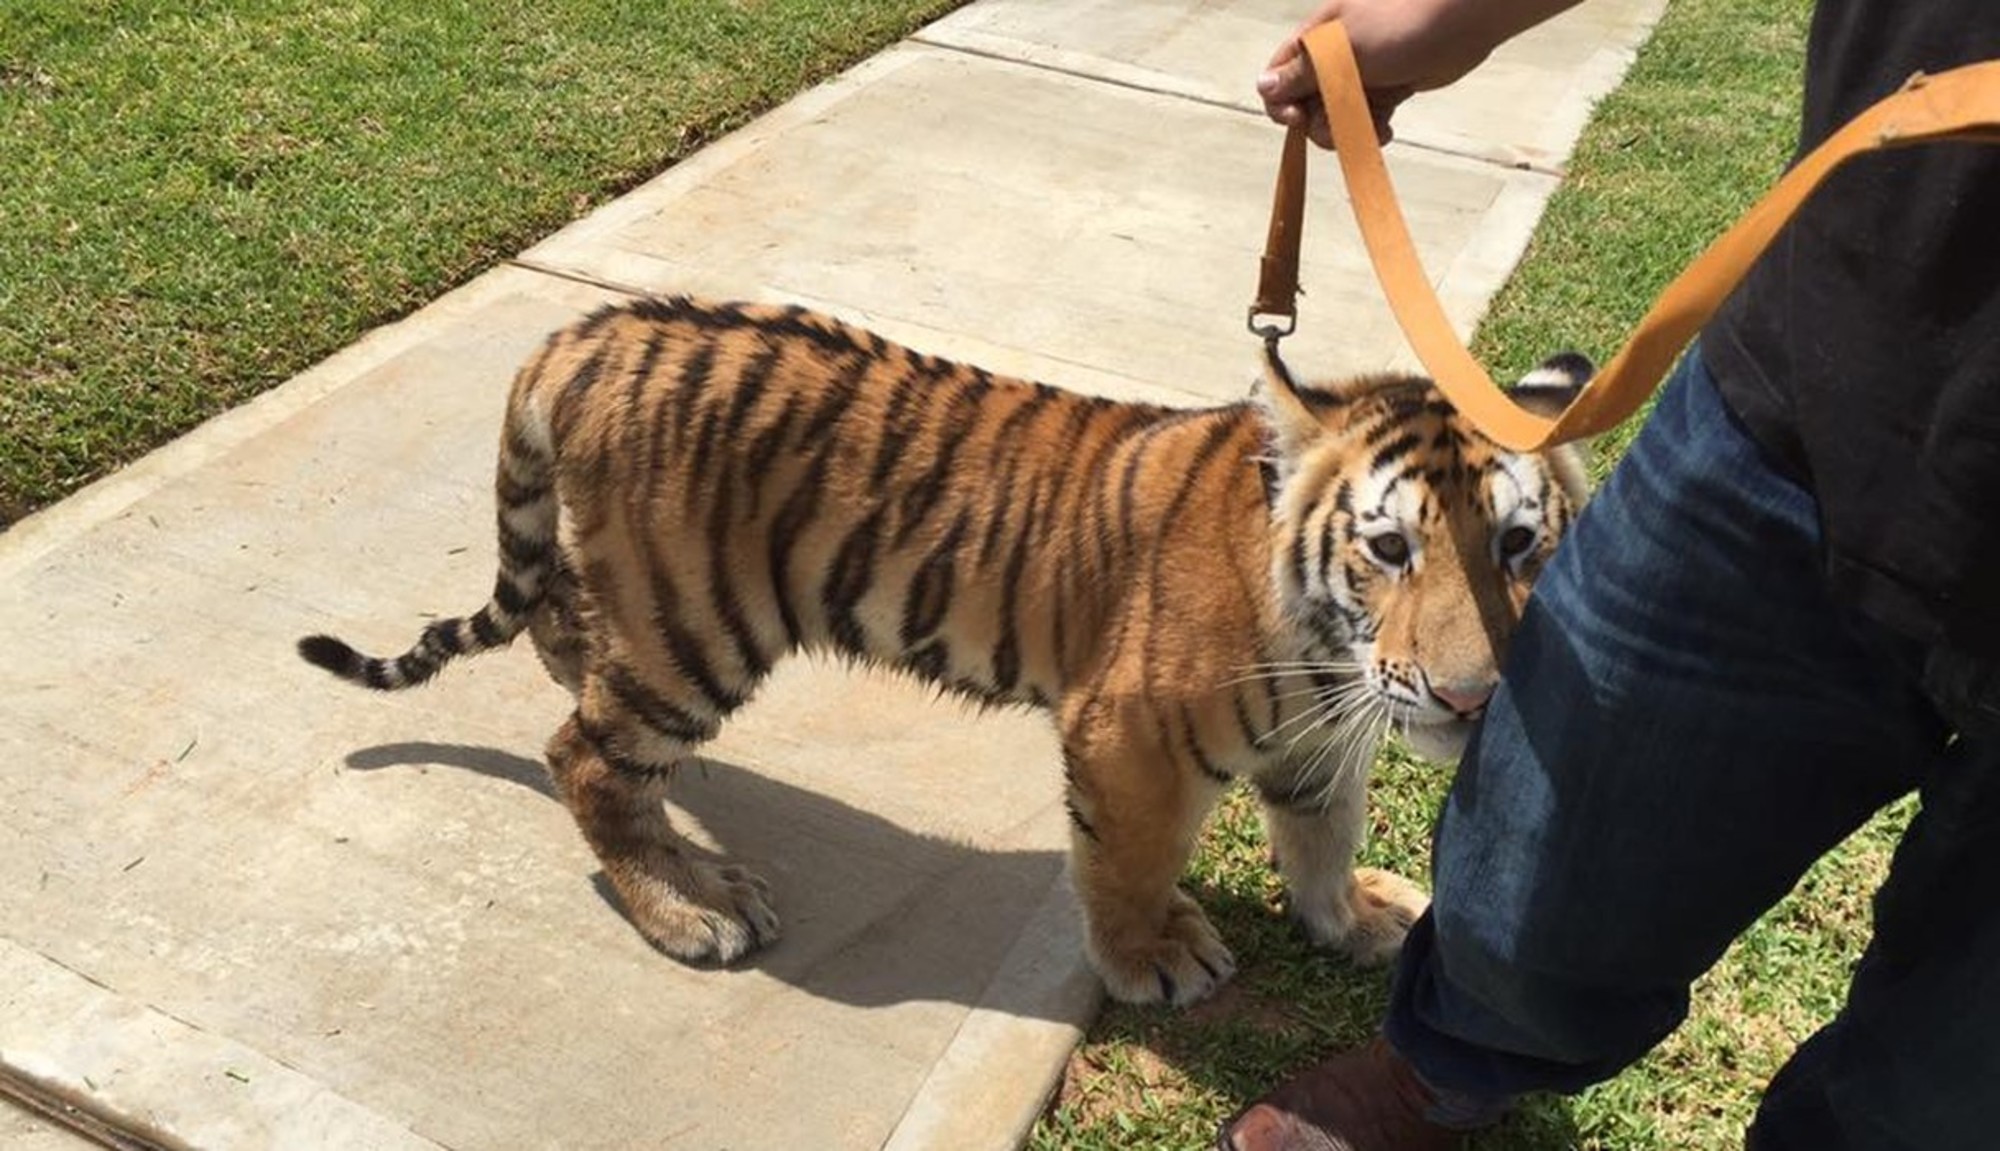 Tiger Cub On A Leash Found Wandering The Streets Of Texas | Tiger ...